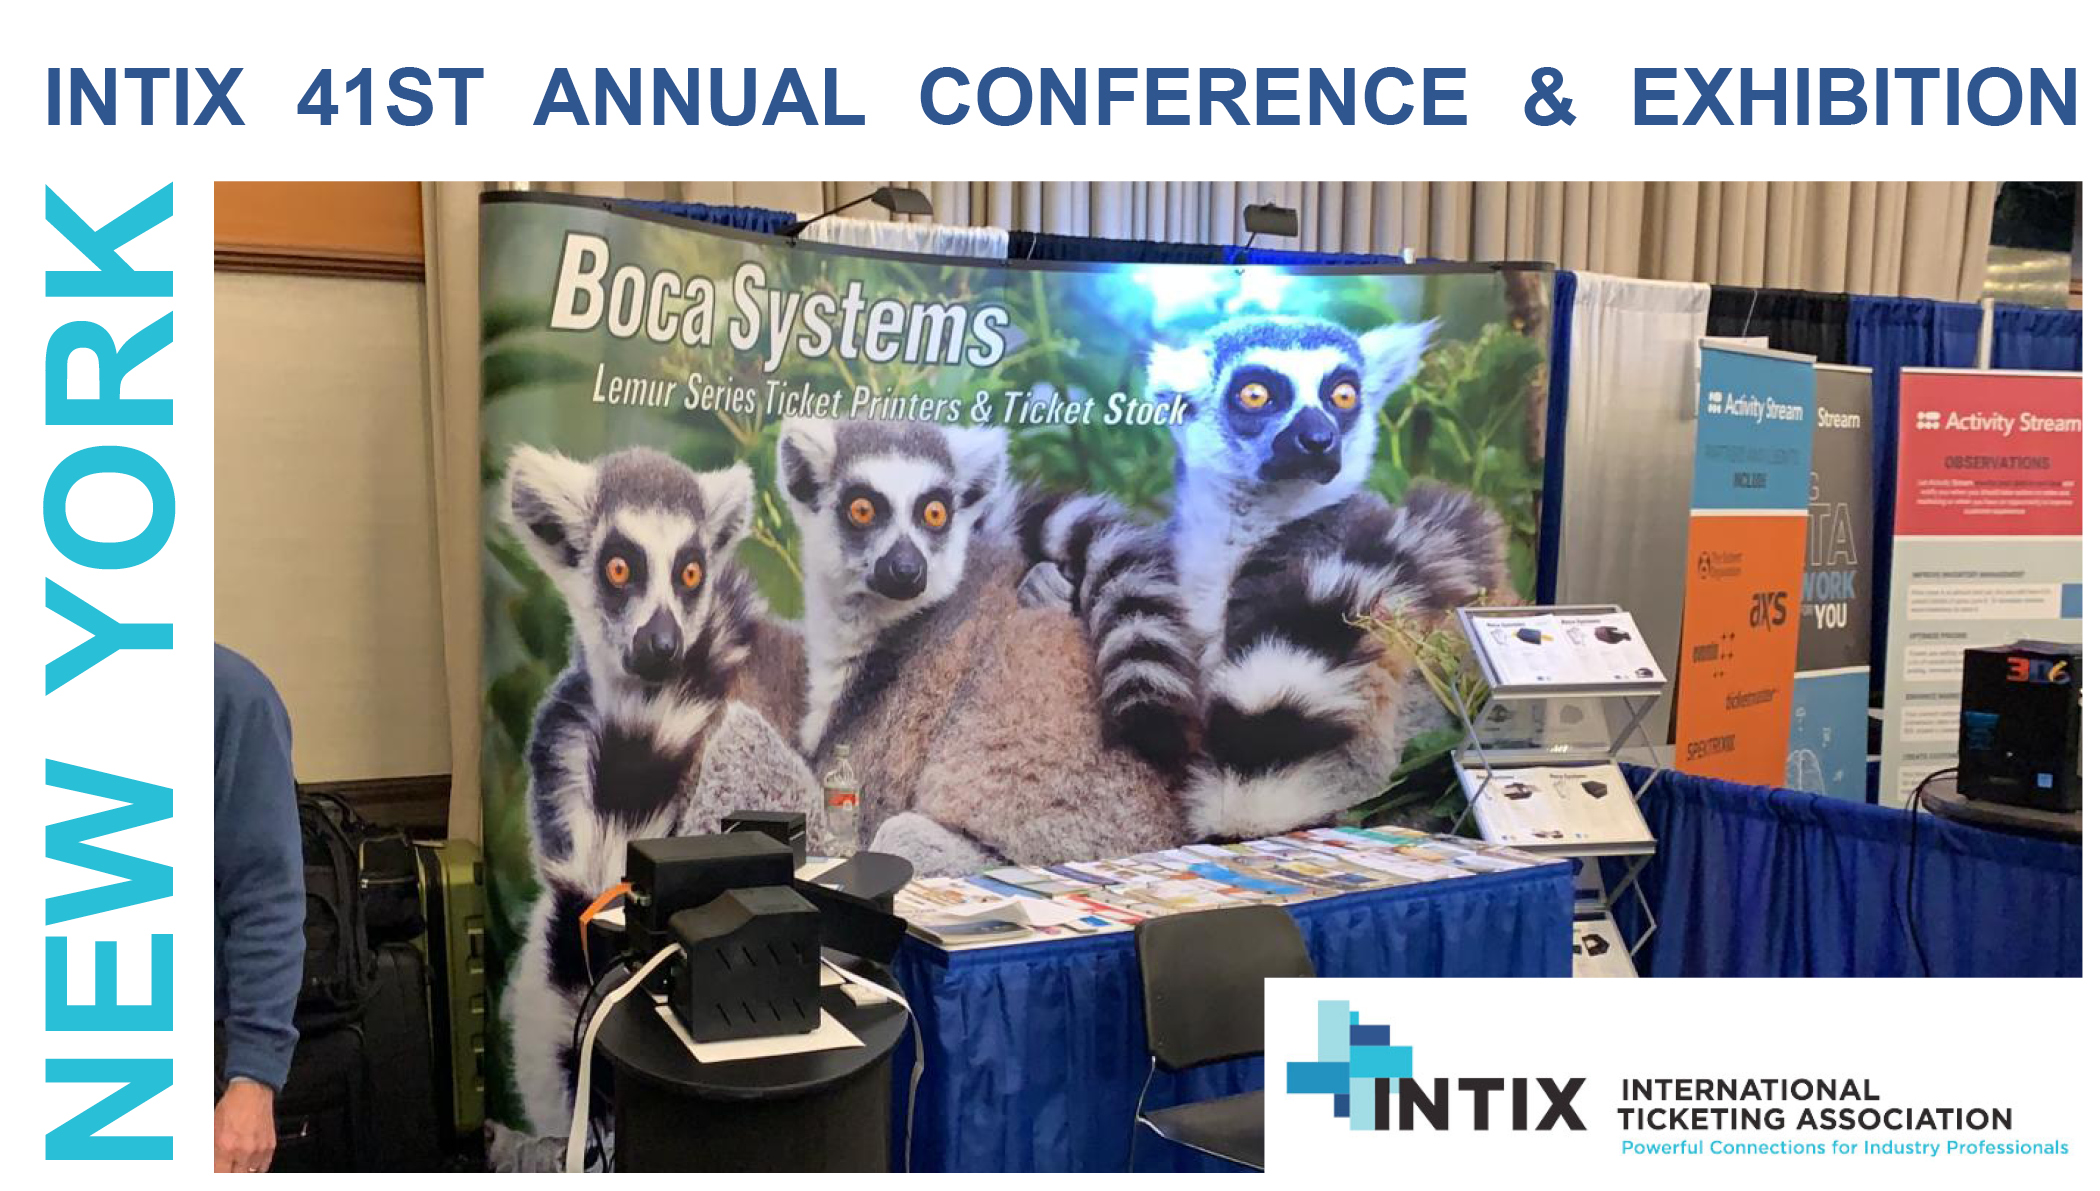 Meet us at the Intix Exhibition in New York!